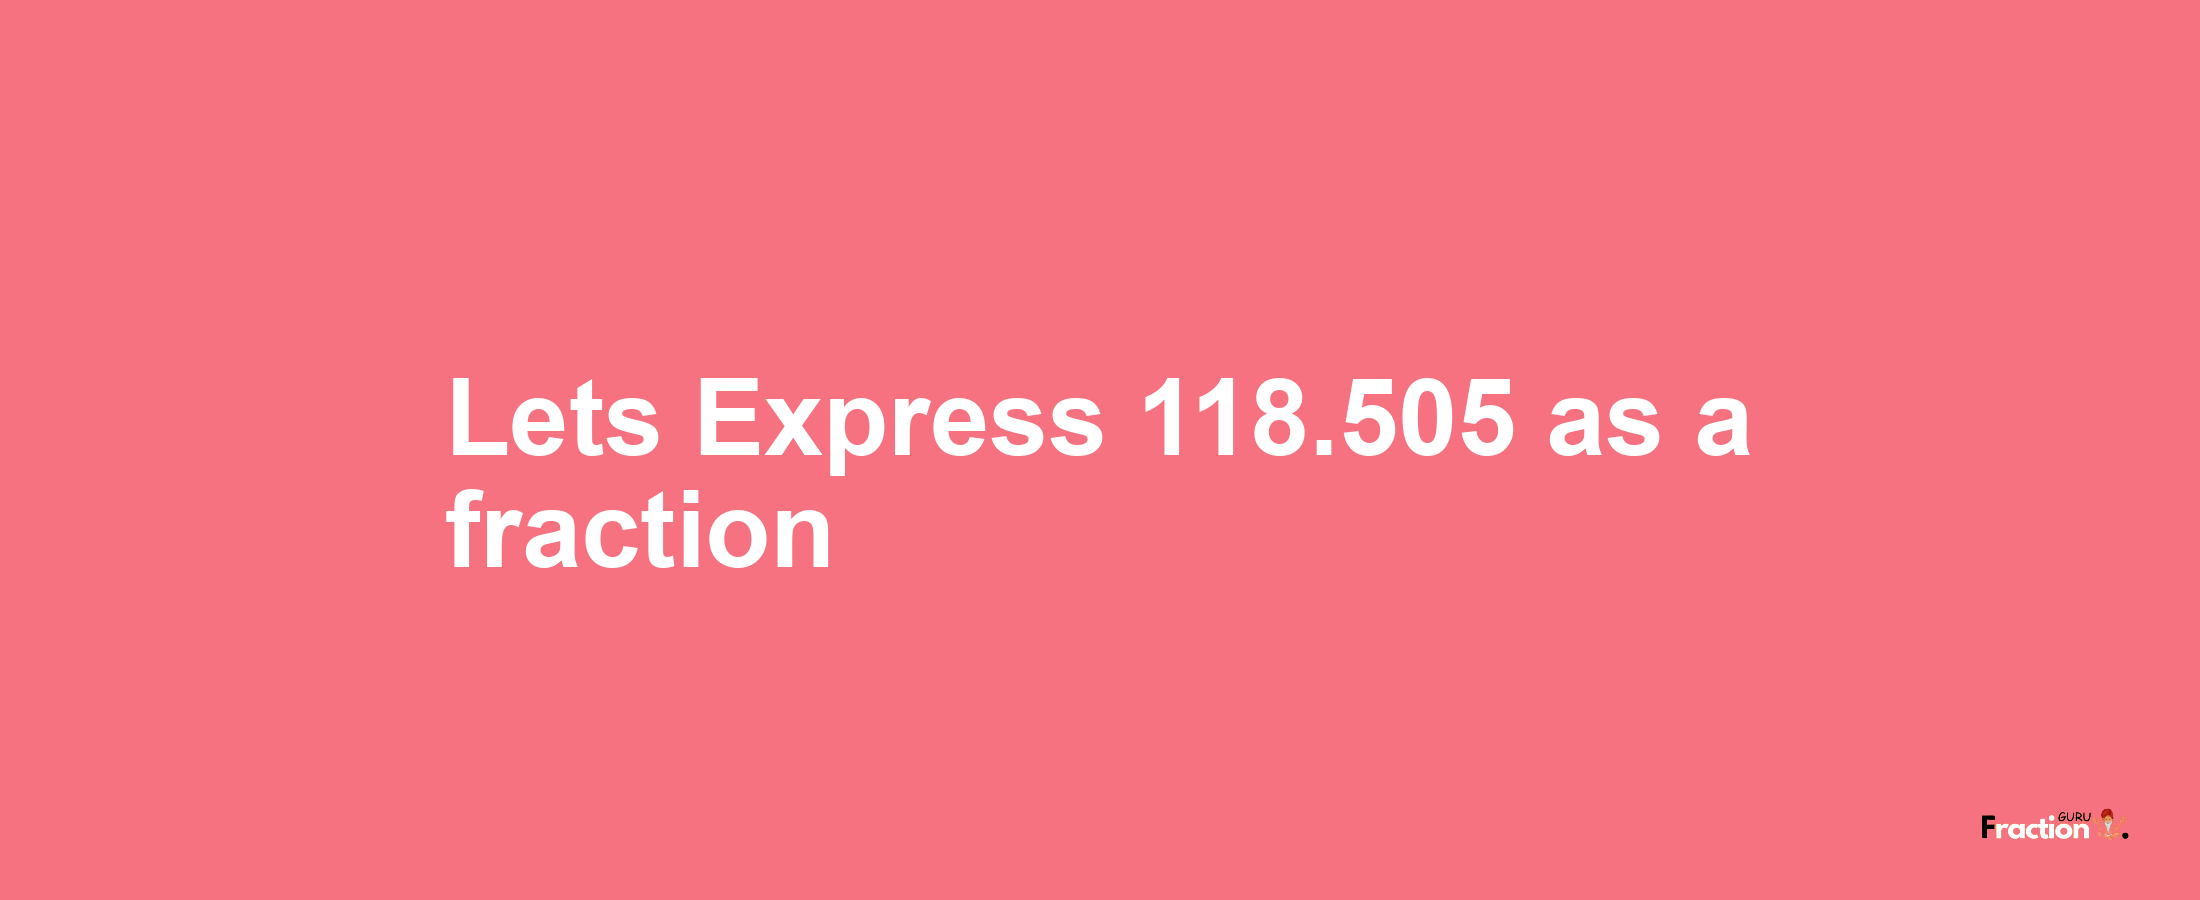 Lets Express 118.505 as afraction